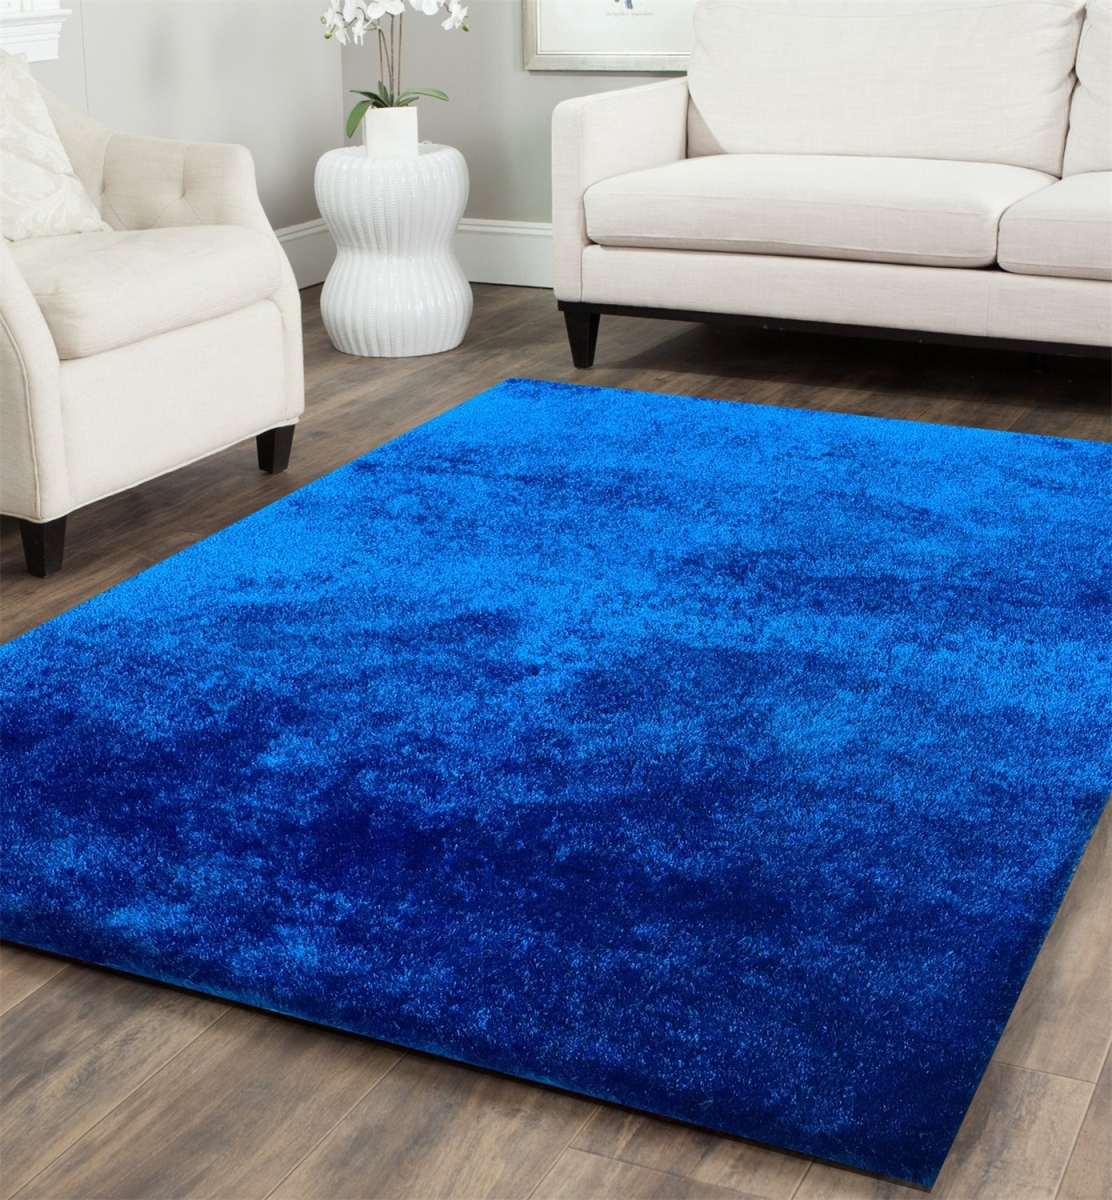 Picture of Amazing Rugs A1012-57 5 x 7 ft. Fuzzy Shaggy Hand Tufted Area Rug in Electro Blue